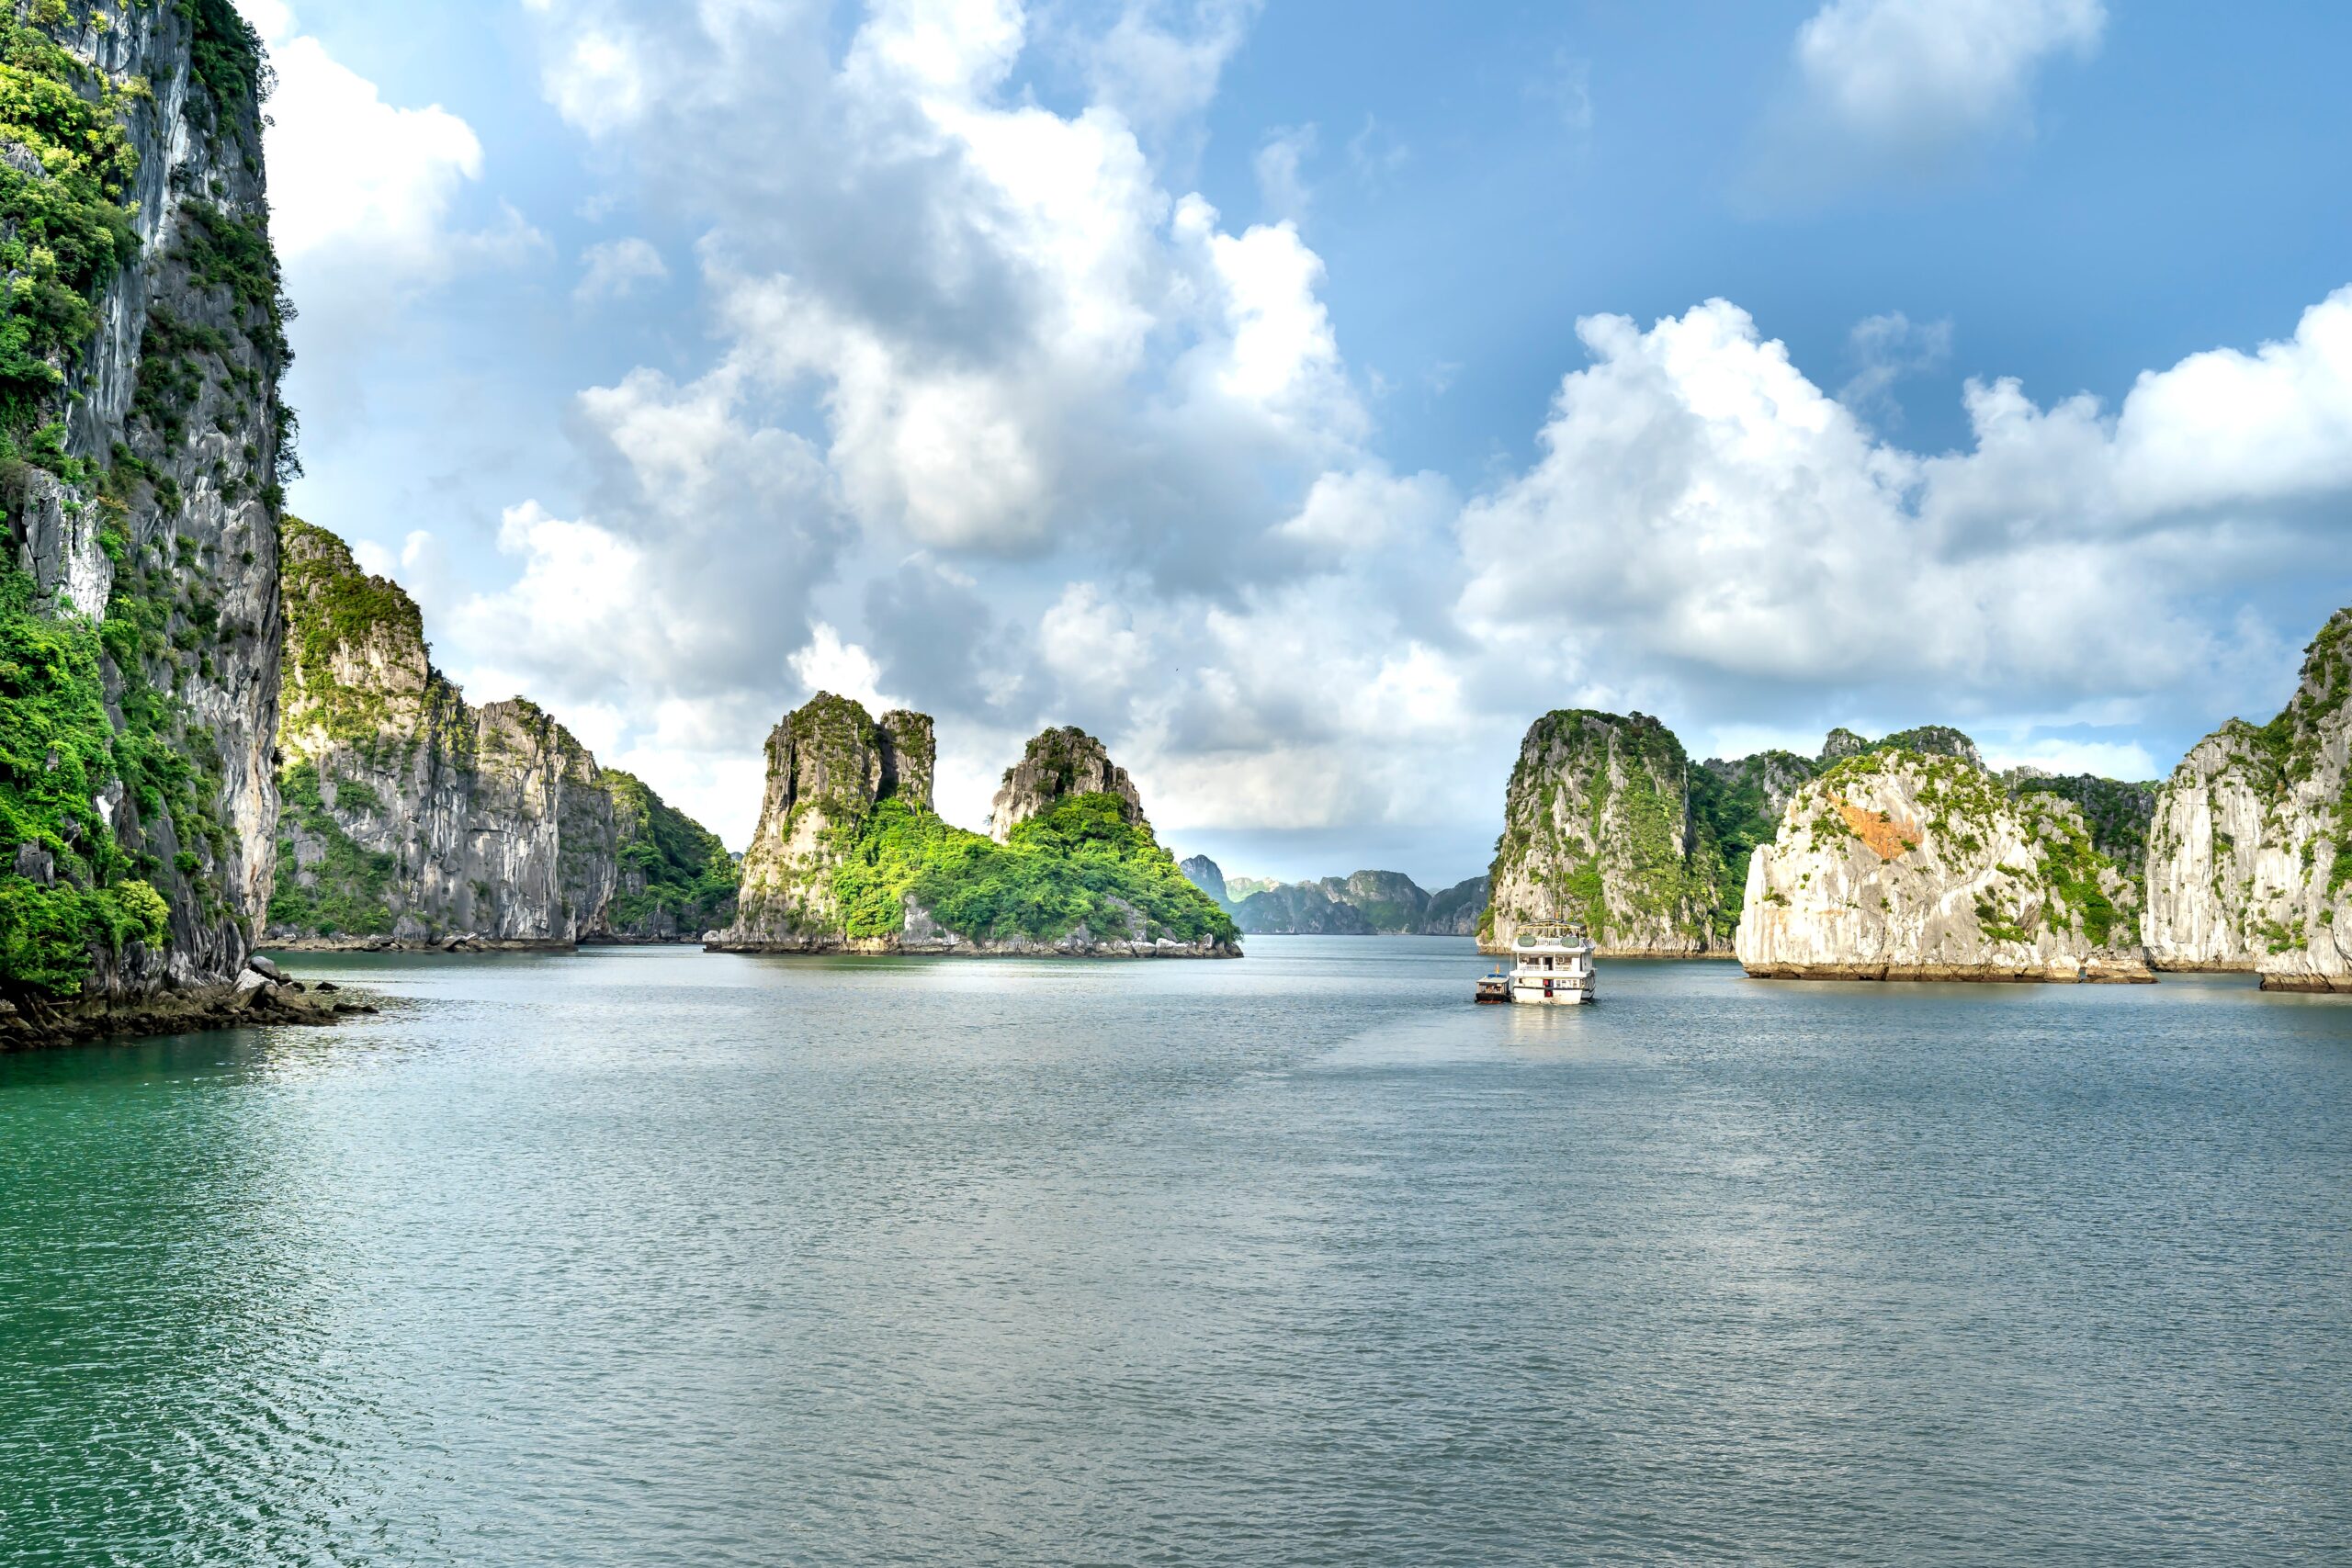 The Top 5 things to do in Vietnam